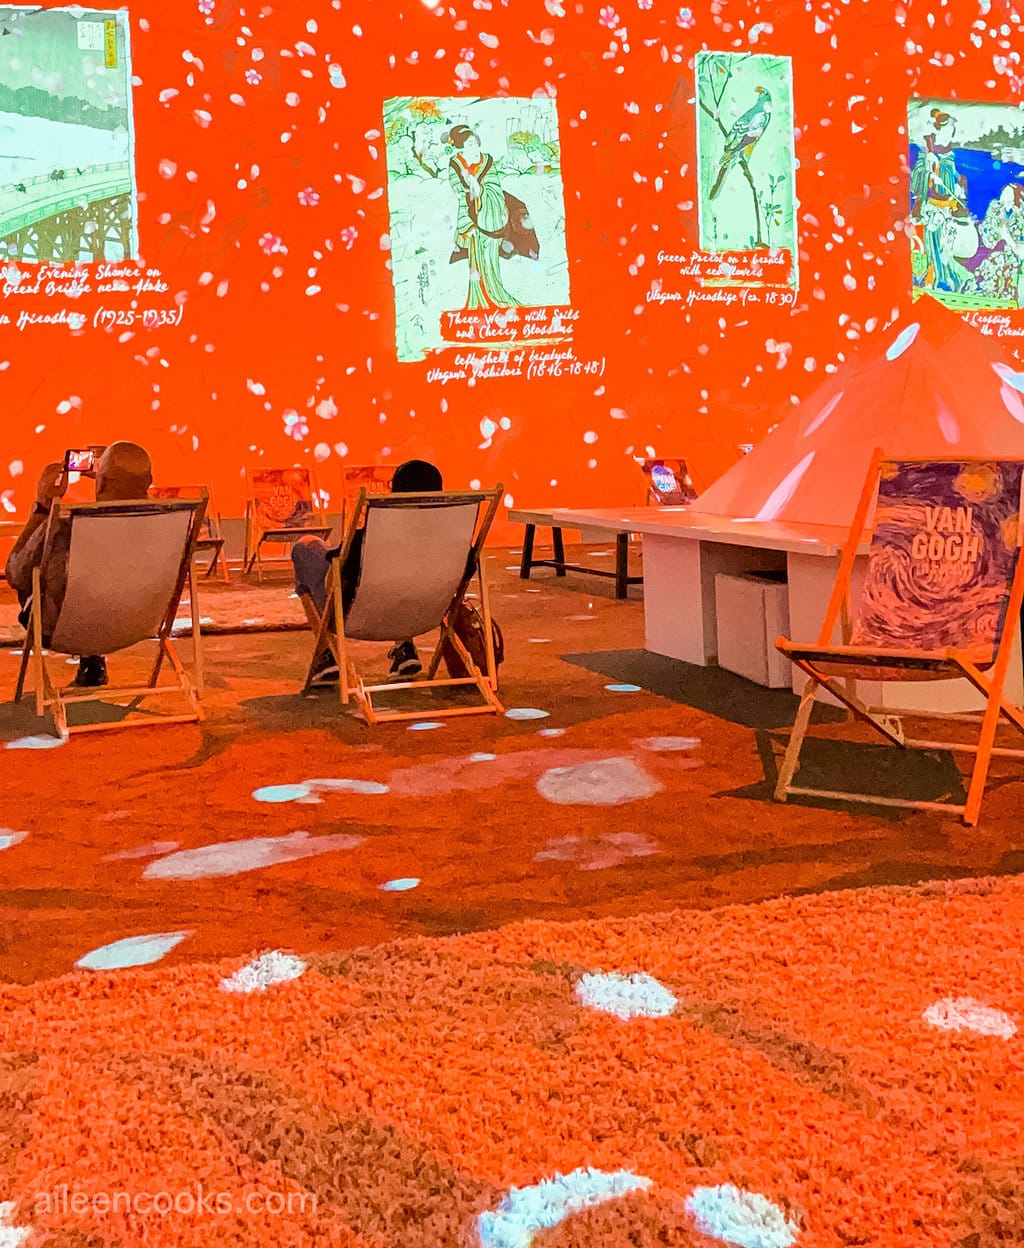 A room with several area rugs and pictures of van Gogh's are projected on the wall in red colors.